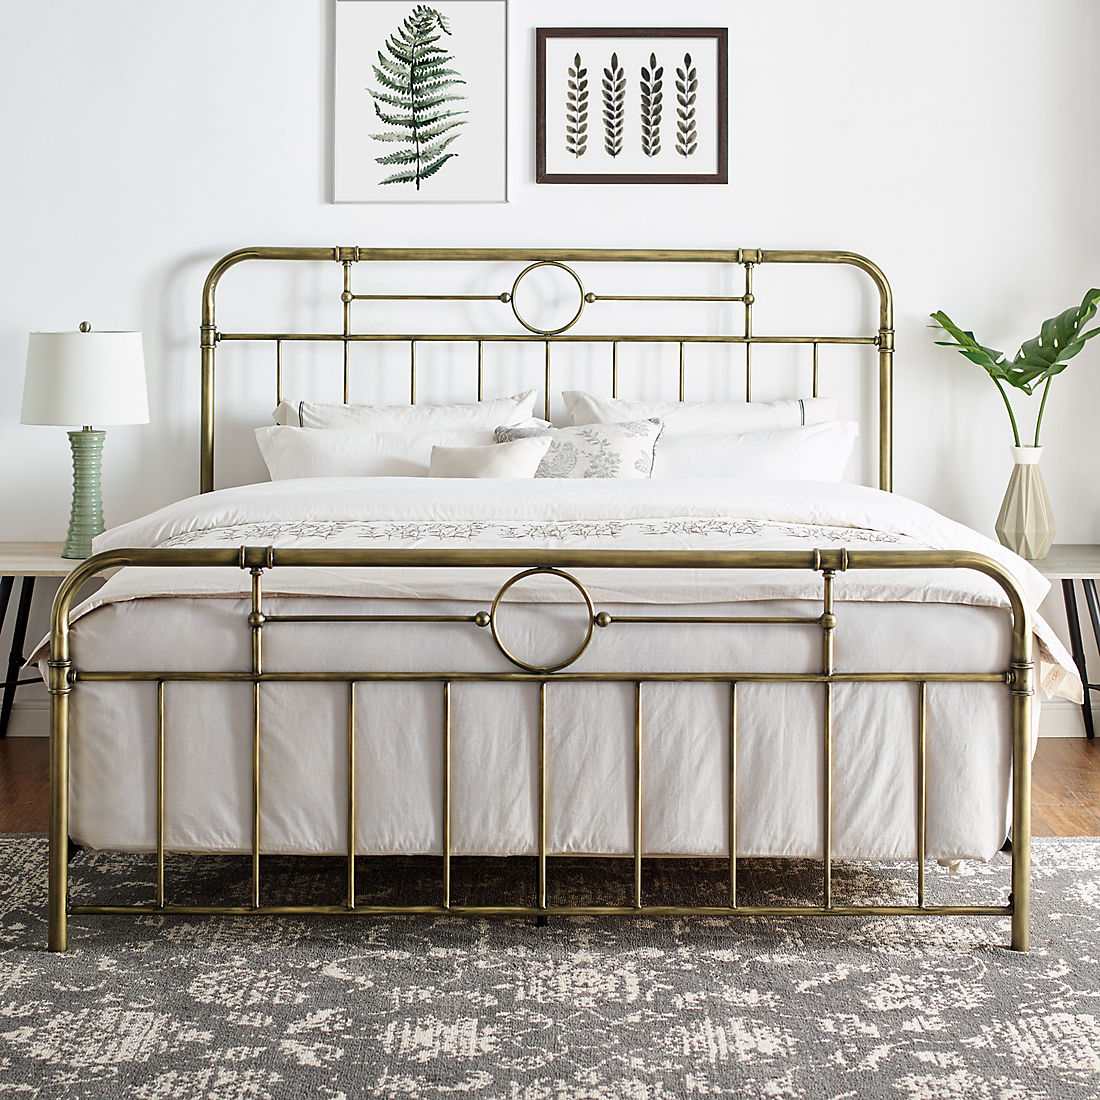 Bohemian King Size Metal Pipe Bed Frame, King Bed And Frame